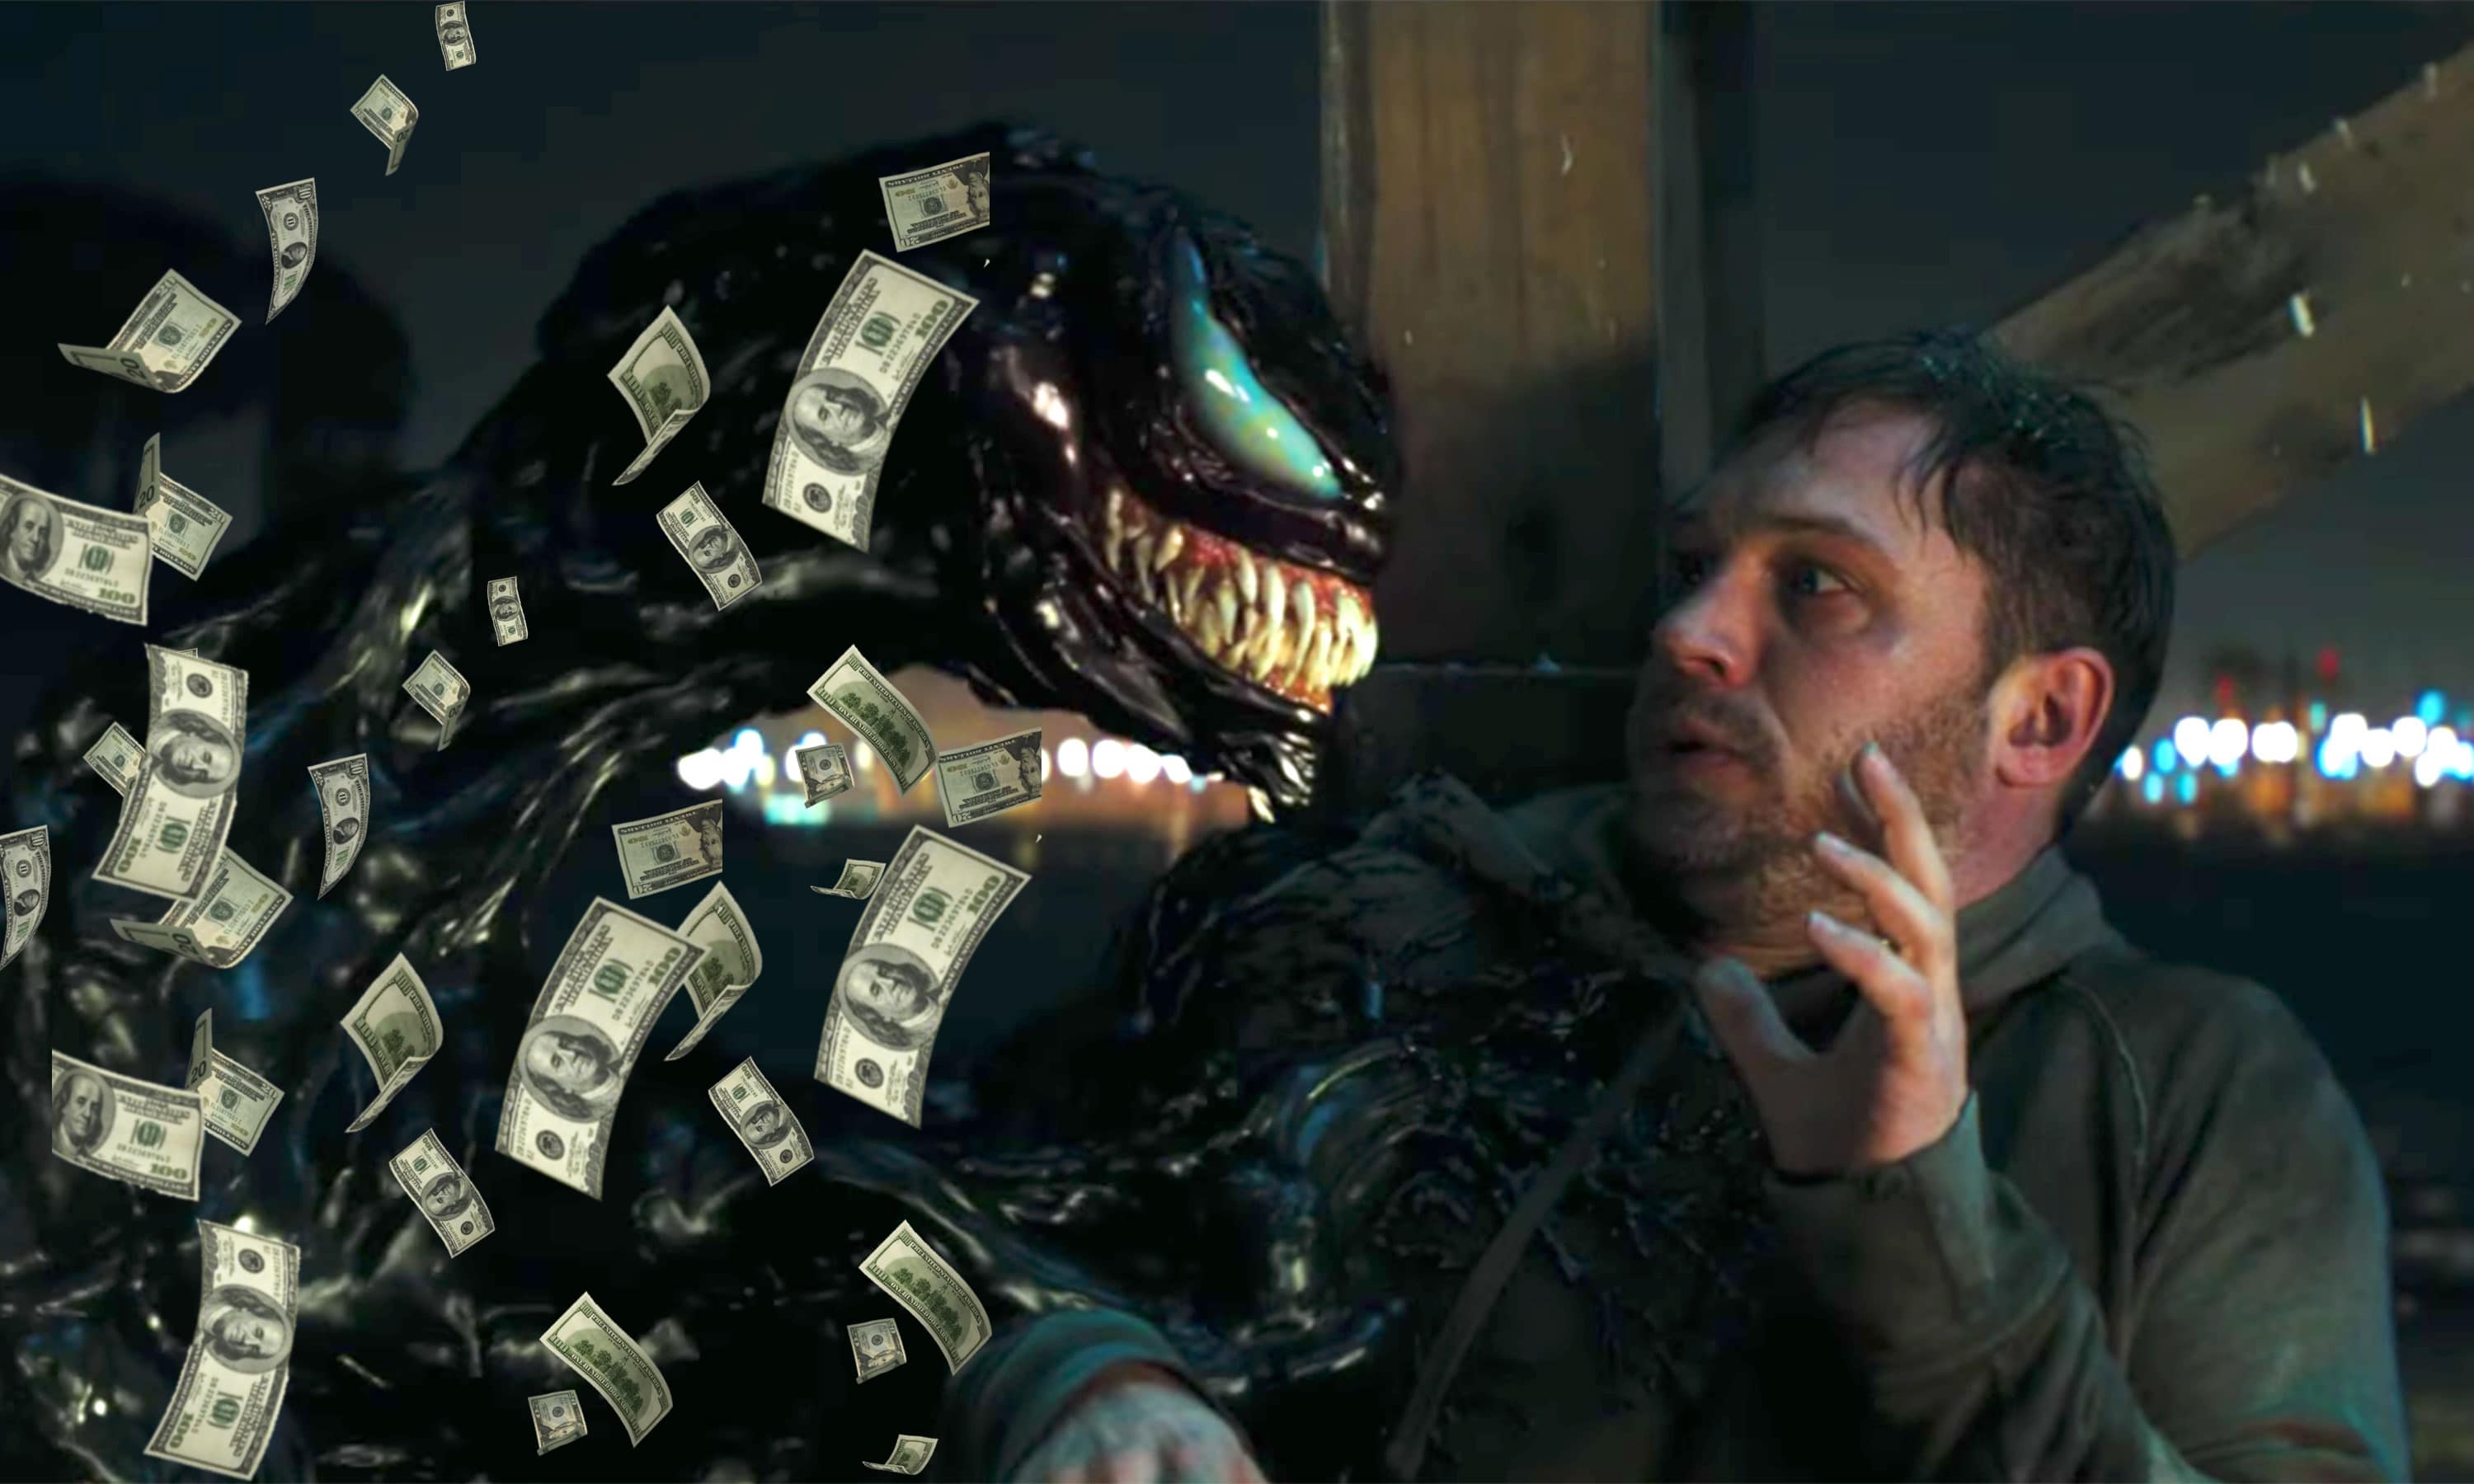 Venom Tracking For A ‘Record Breaking’ Opening at Box Office